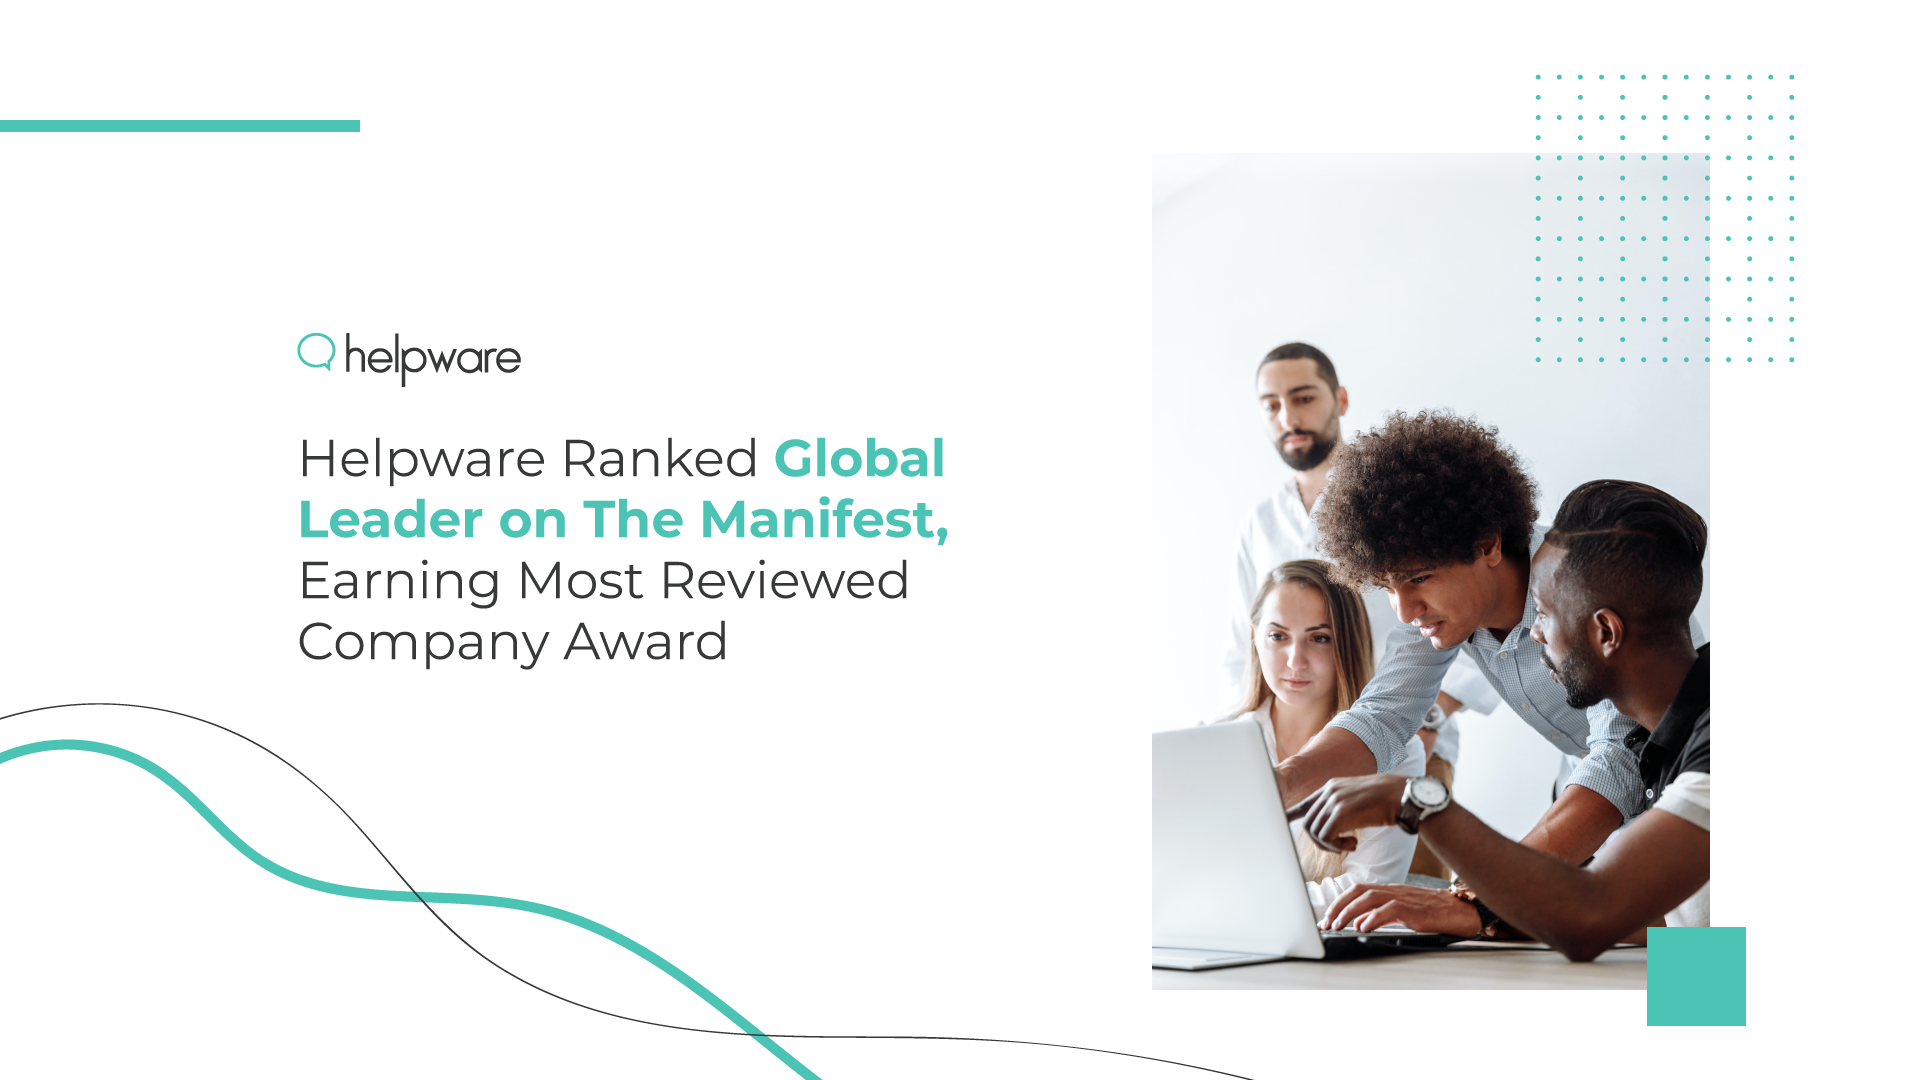 Helpware Ranked Global Leader on The Manifest, Earning Most Reviewed Company Award